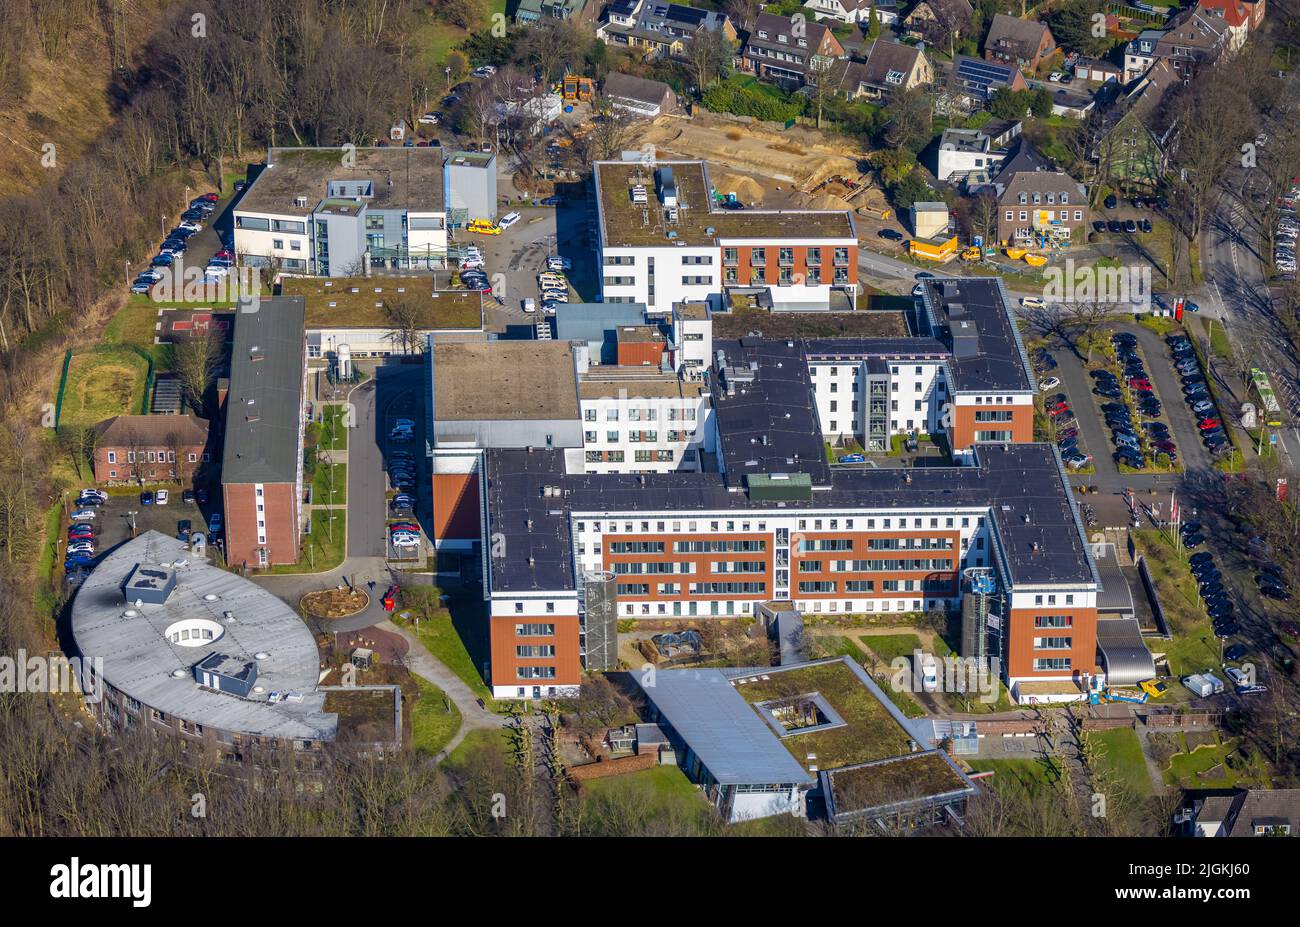 Aerial view, miners' hospital in the south-west district of Bottrop, Ruhr area, North Rhine-Westphalia, Germany, Bottrop, DE, Europe, healthcare, hosp Stock Photo